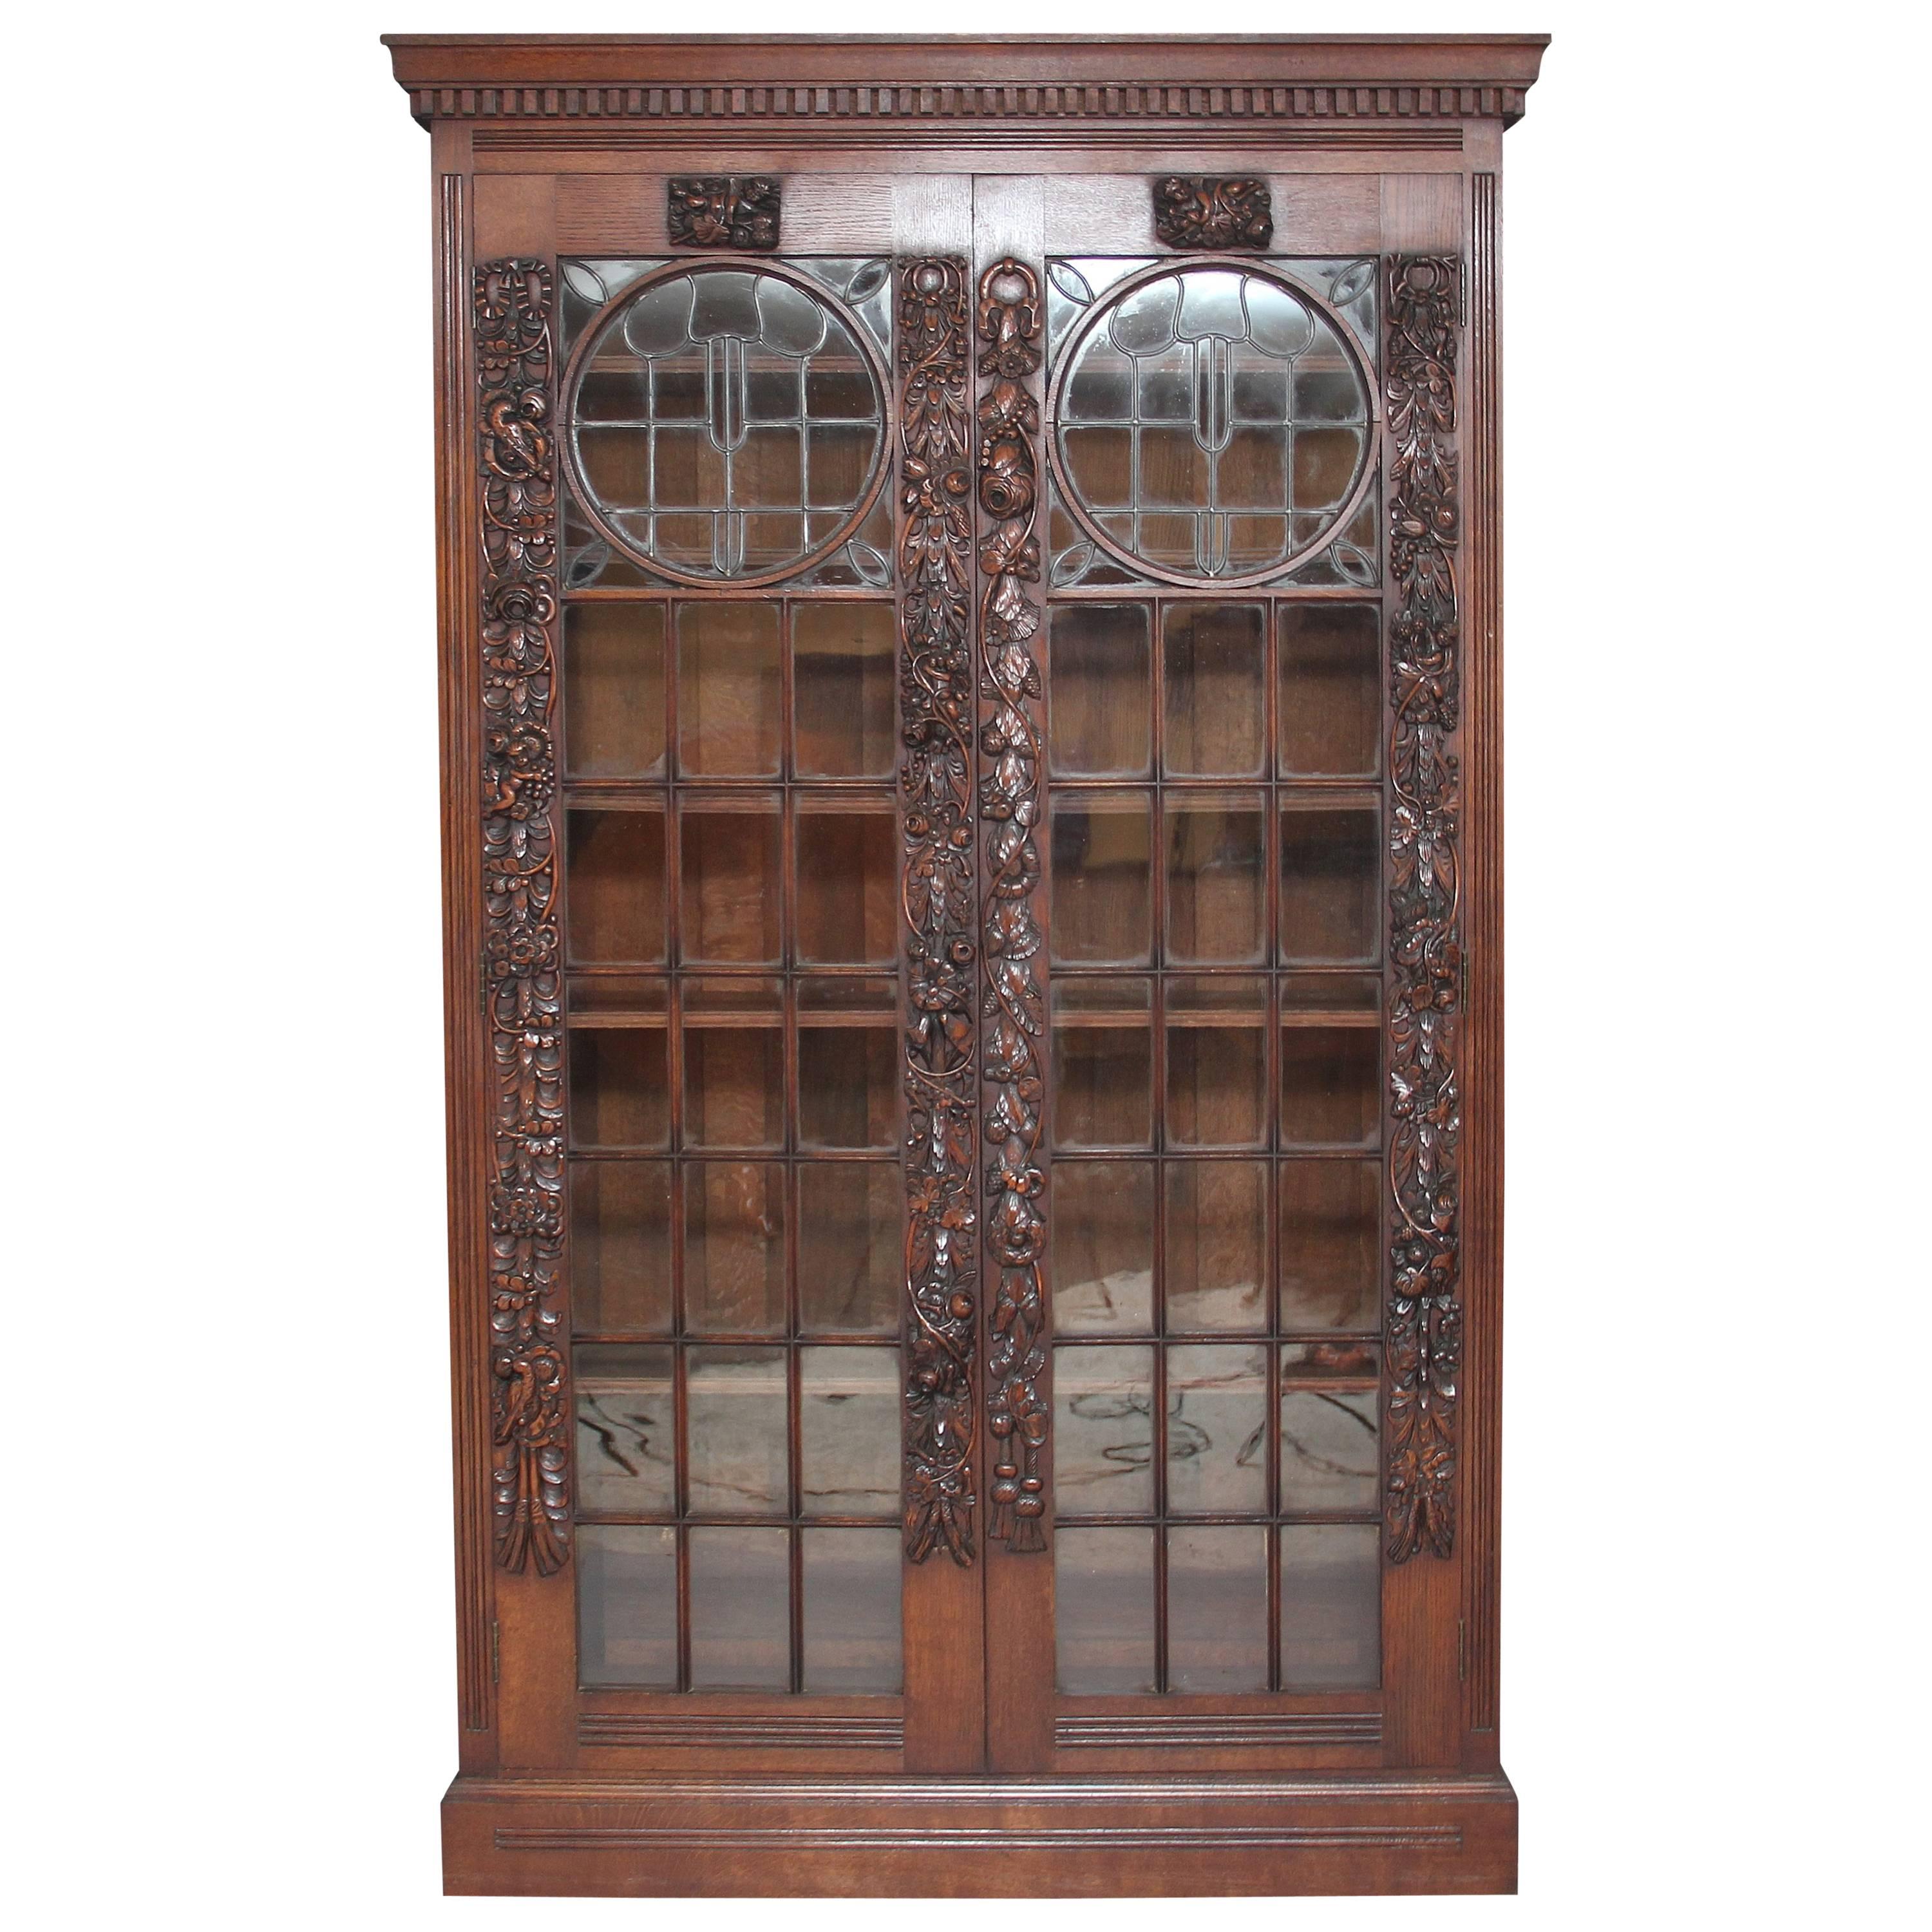 19th Century Carved Oak Bookcase